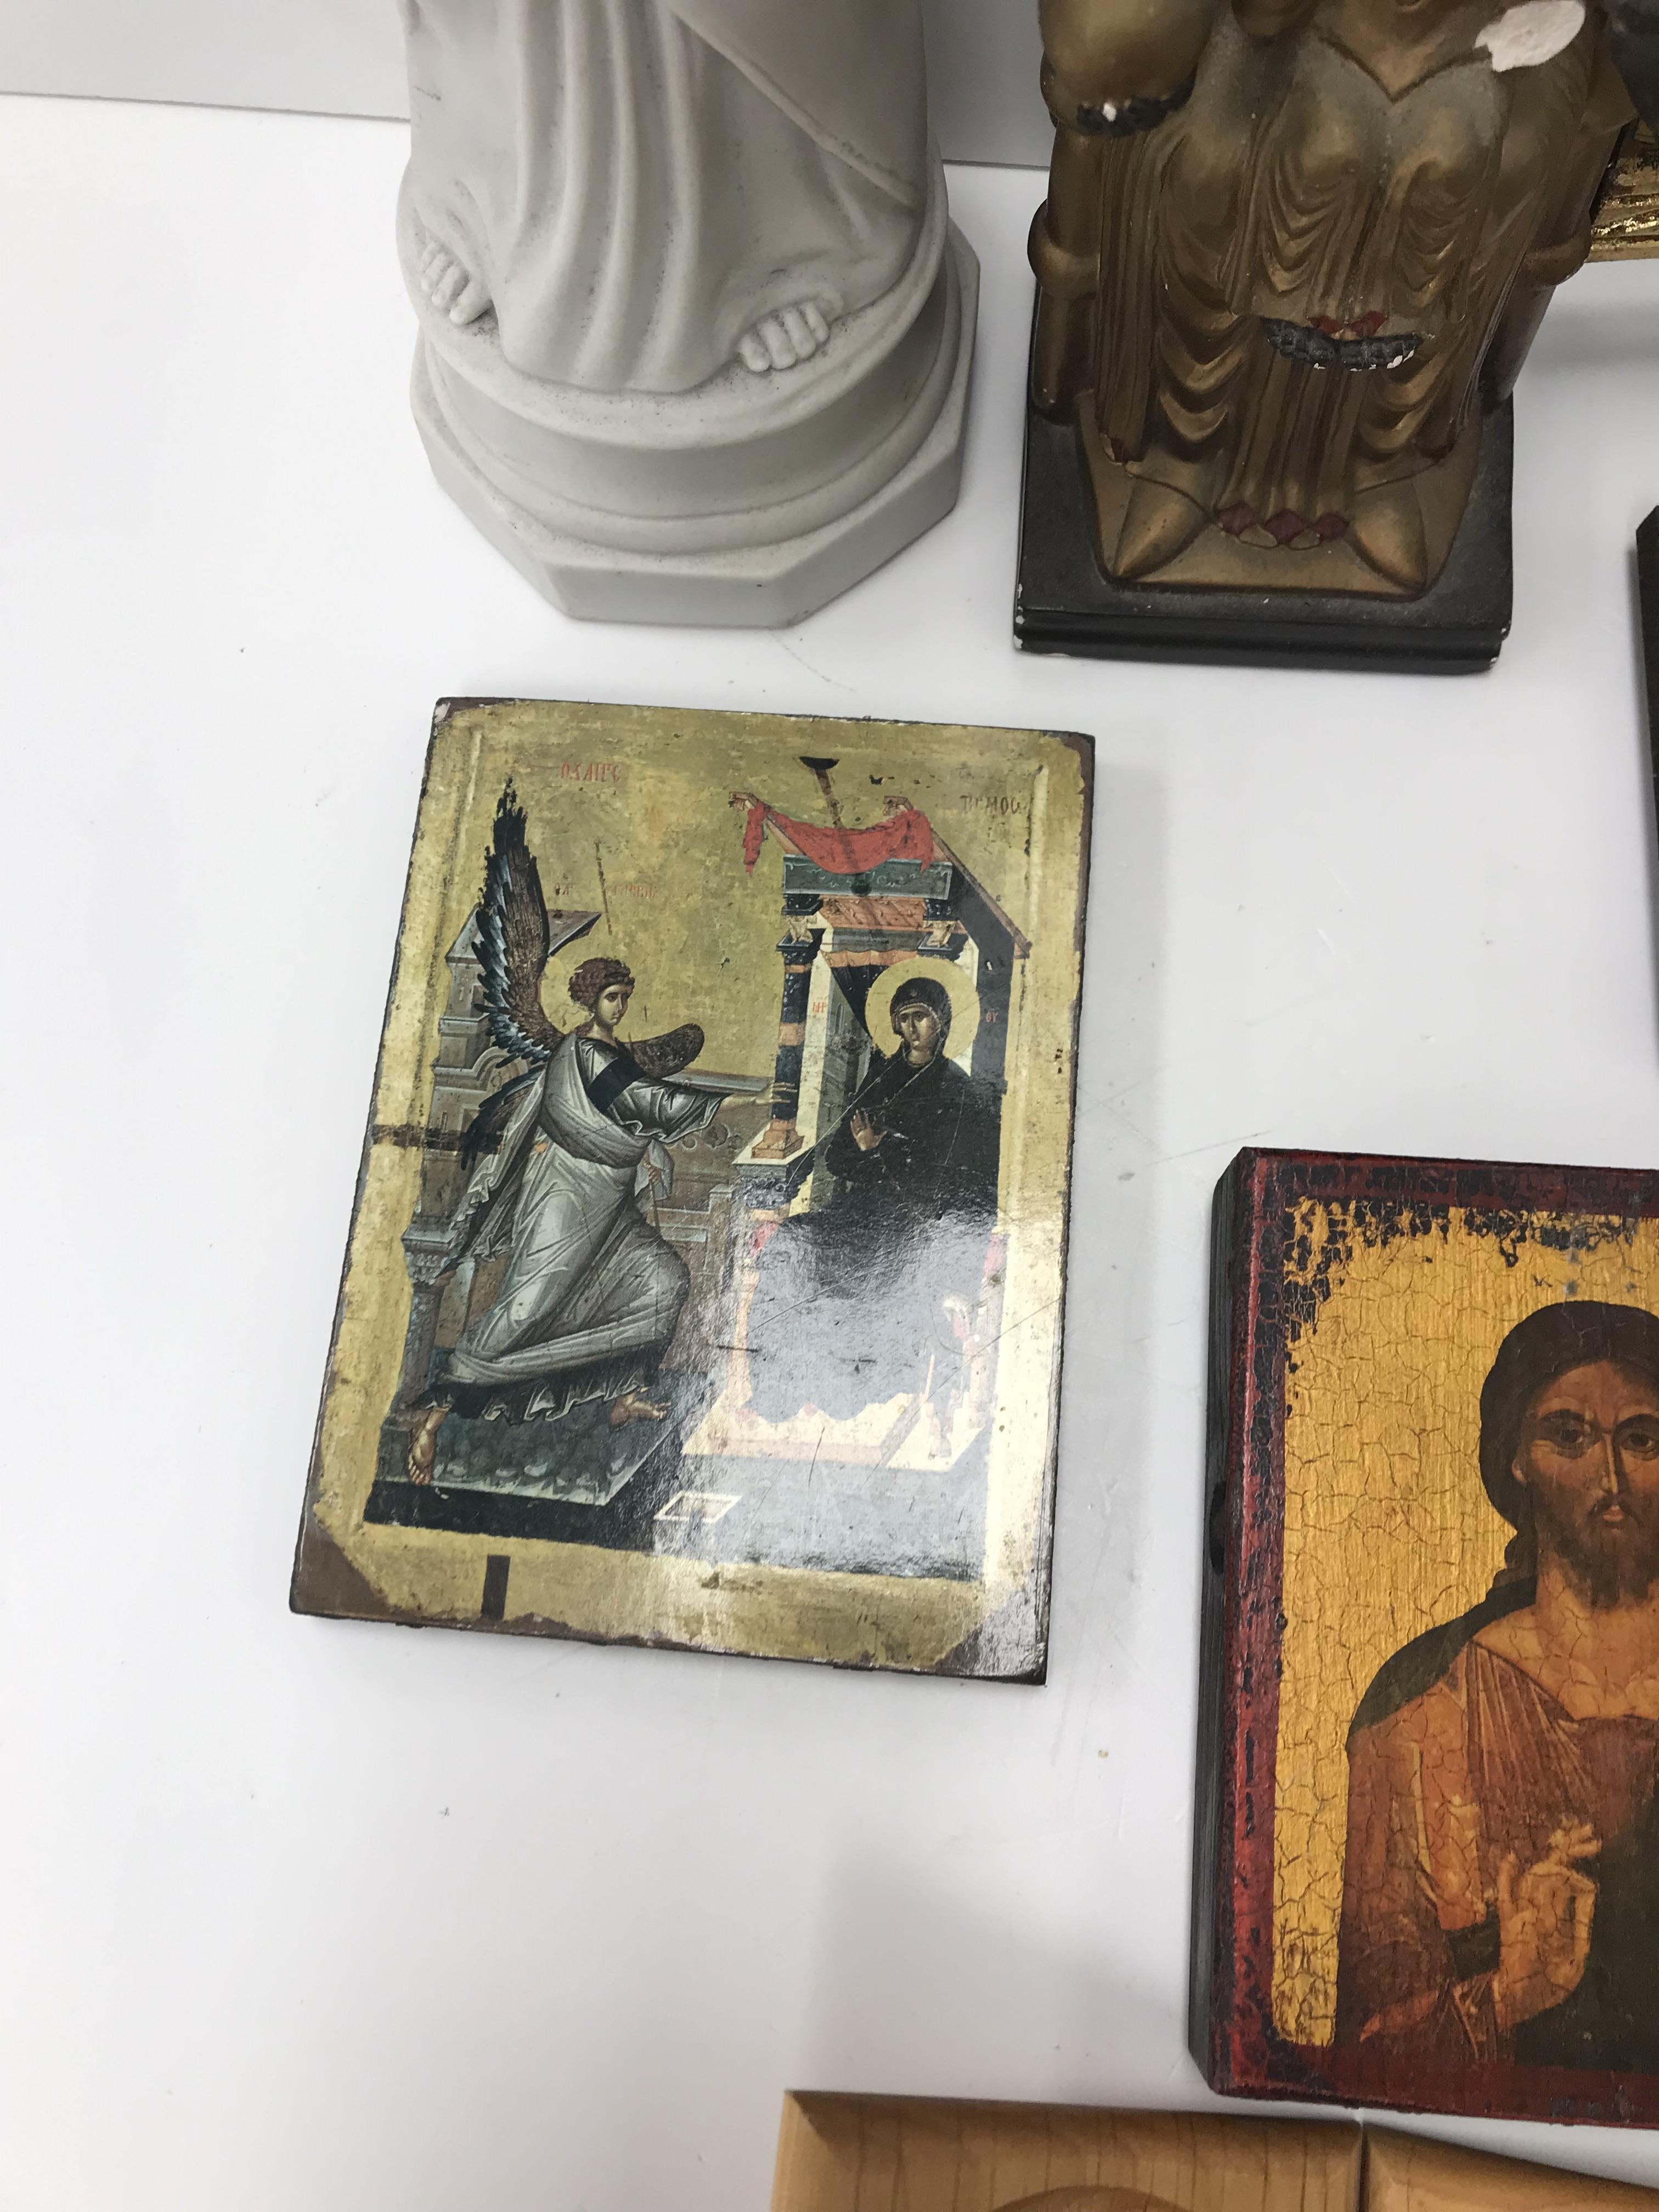 A box of various religious artefacts including a blanc de chine figure of "The Virgin Mary", - Image 4 of 4